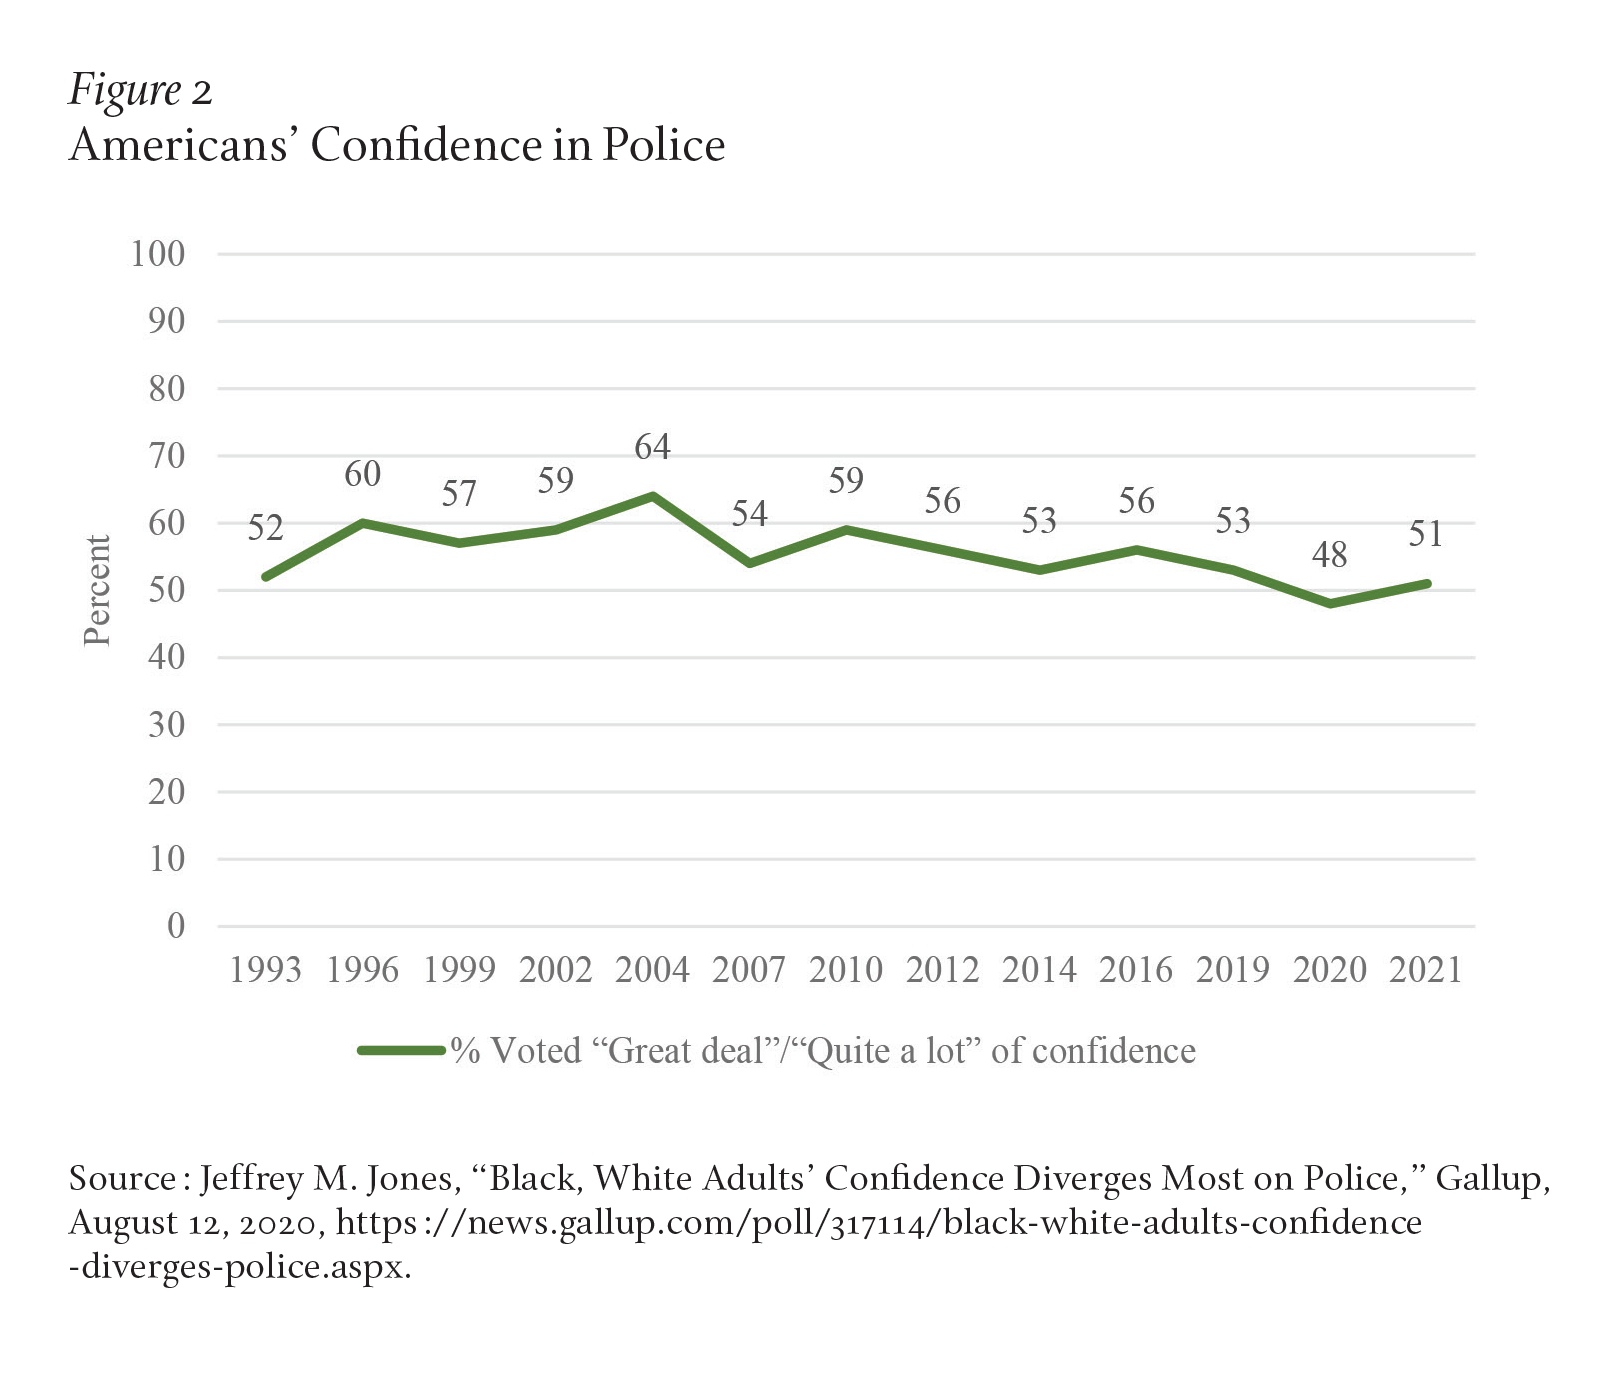 Among all adults, trust in the police has remained largely flat since 1993, starting at 52%, peaking at 64% in 2004, and declining back to 51% in 2021. See Jeffrey M. Jones, “Black, White Adults’ Confidence Diverges Most on Police,” Gallup, August 12, 2020.